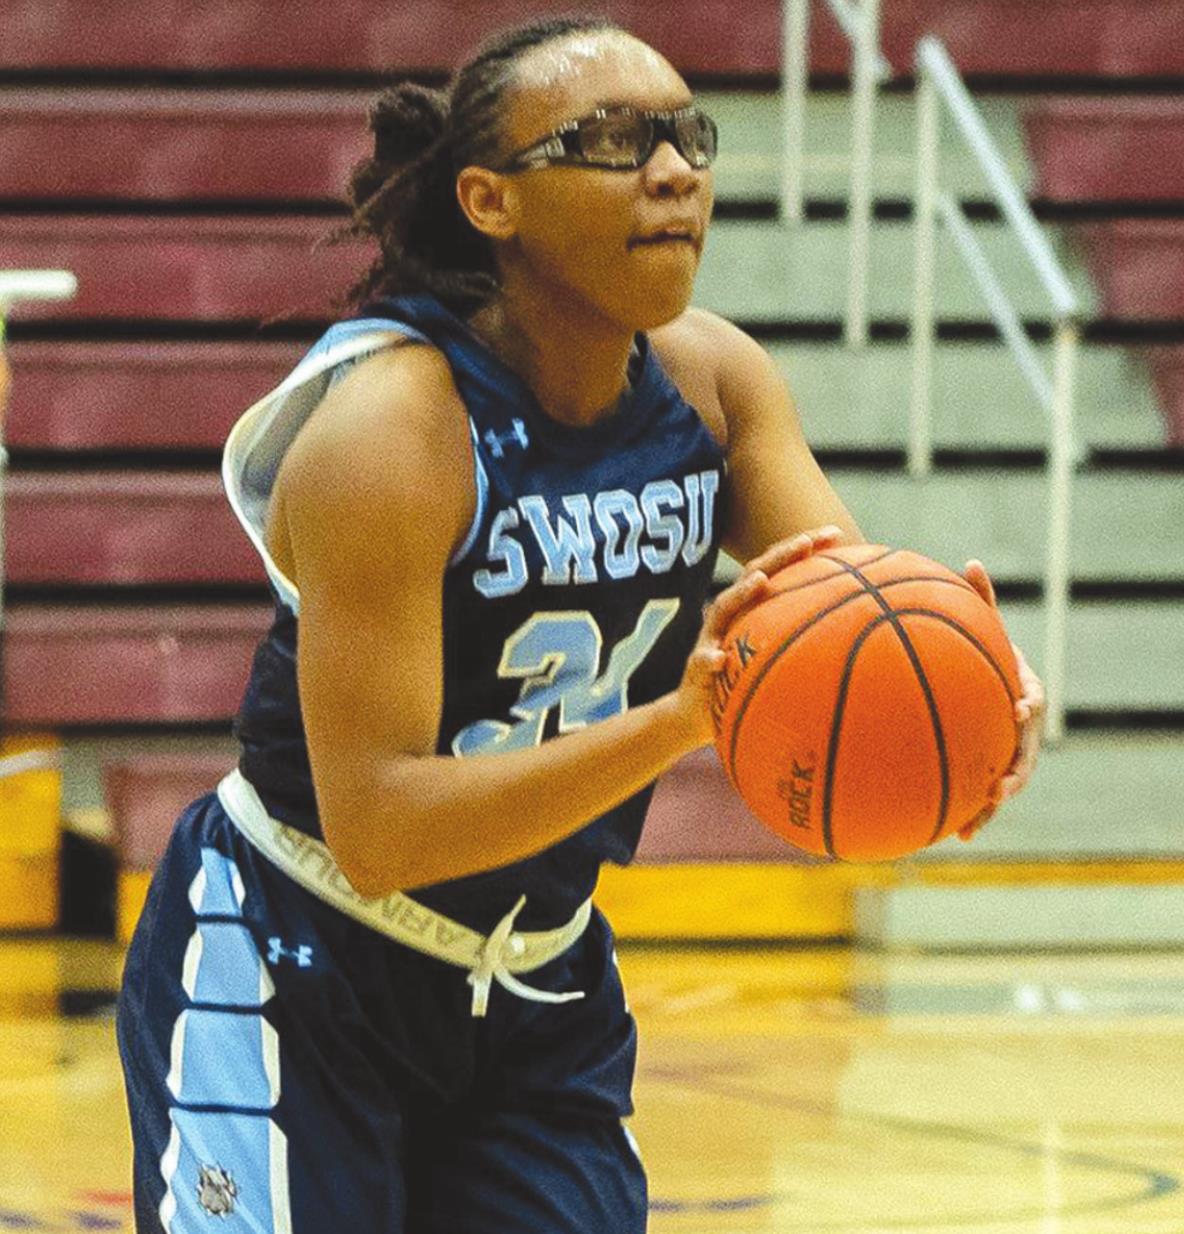 Makyra Tramble helped the SWOSU women win Thusday, by scoring 23 points. Provided